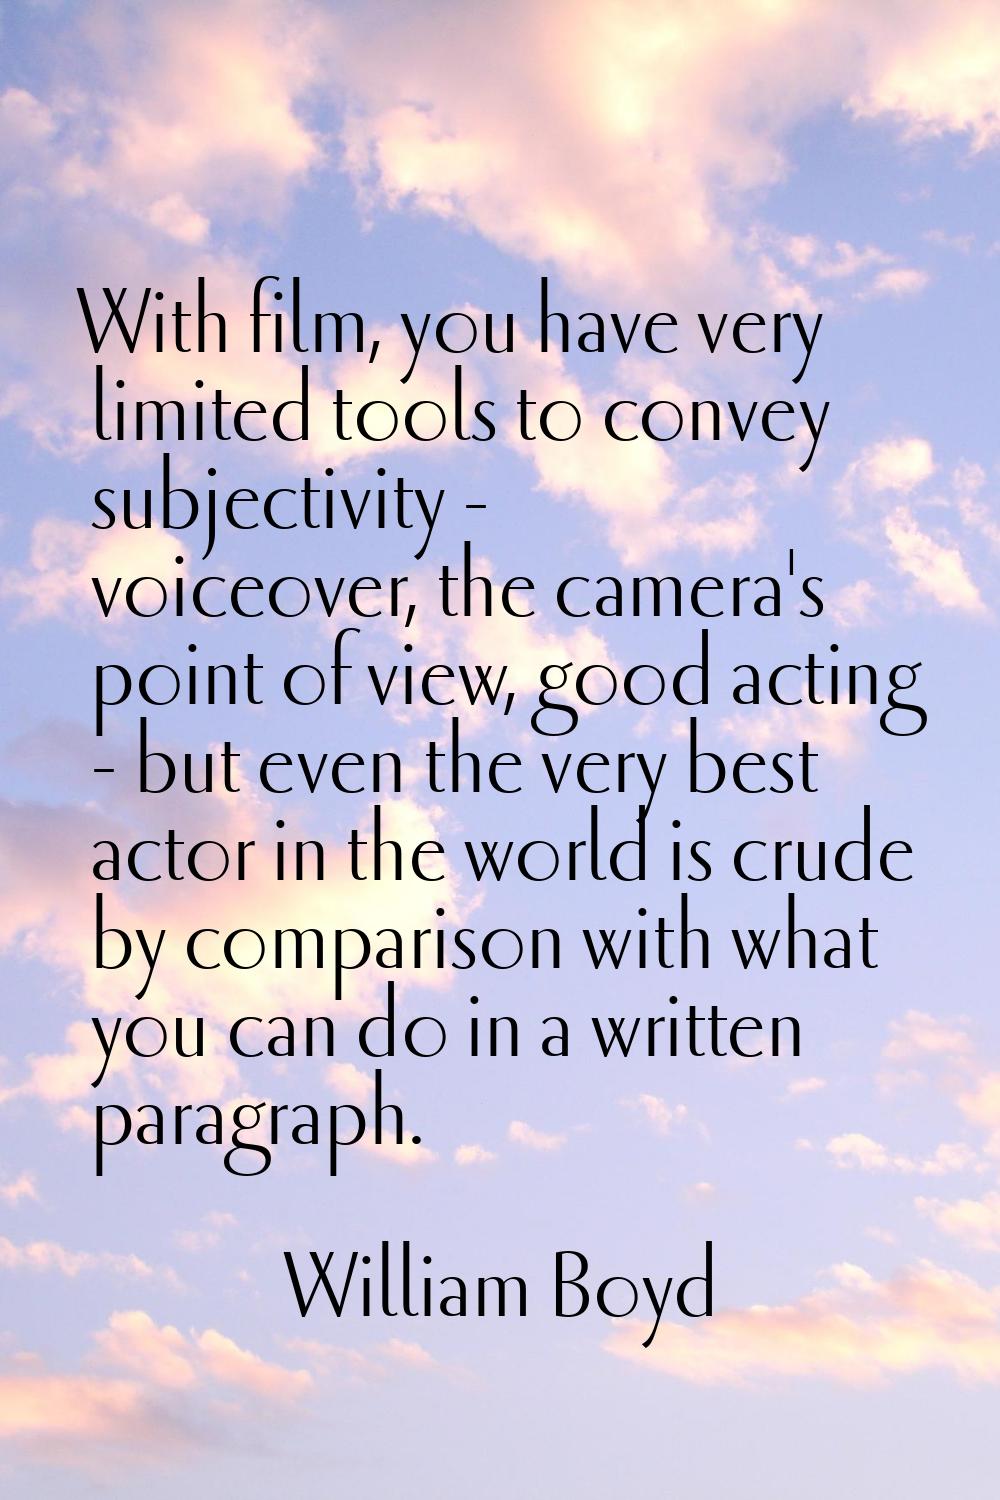 With film, you have very limited tools to convey subjectivity - voiceover, the camera's point of vi